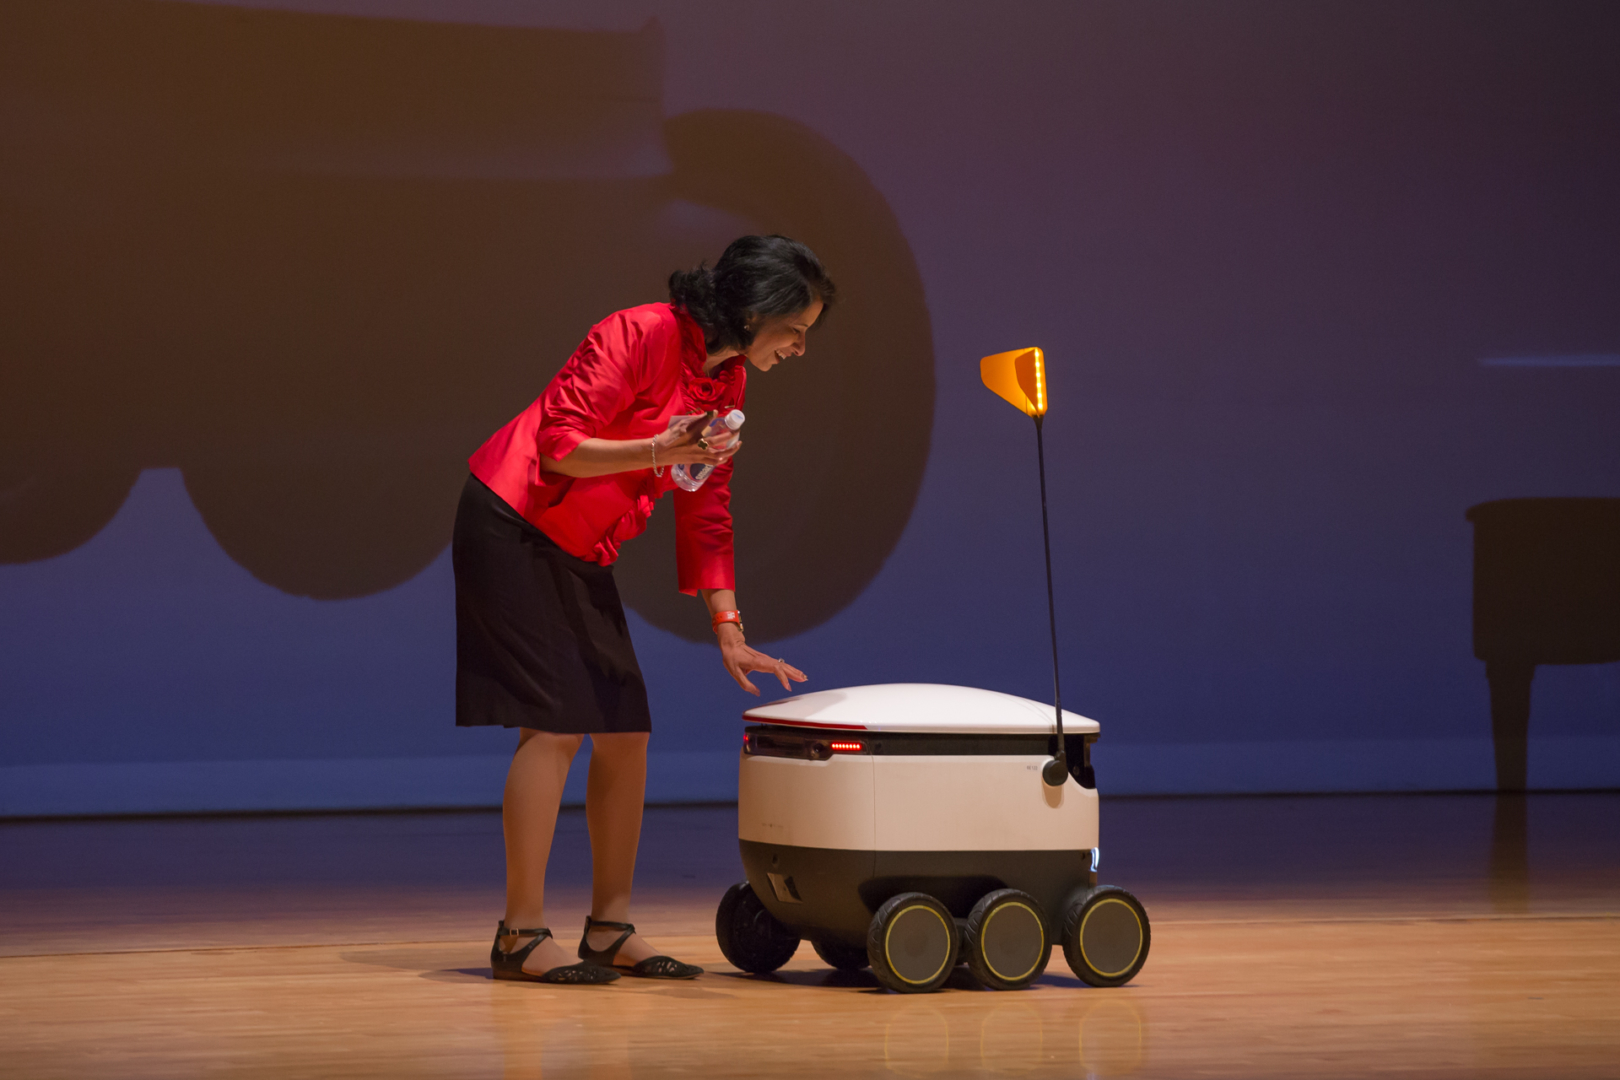 During Khator's fall address, she showcased a new food delivery robot set to "come on campus in a few days." | Trevor Nolley/The Cougar